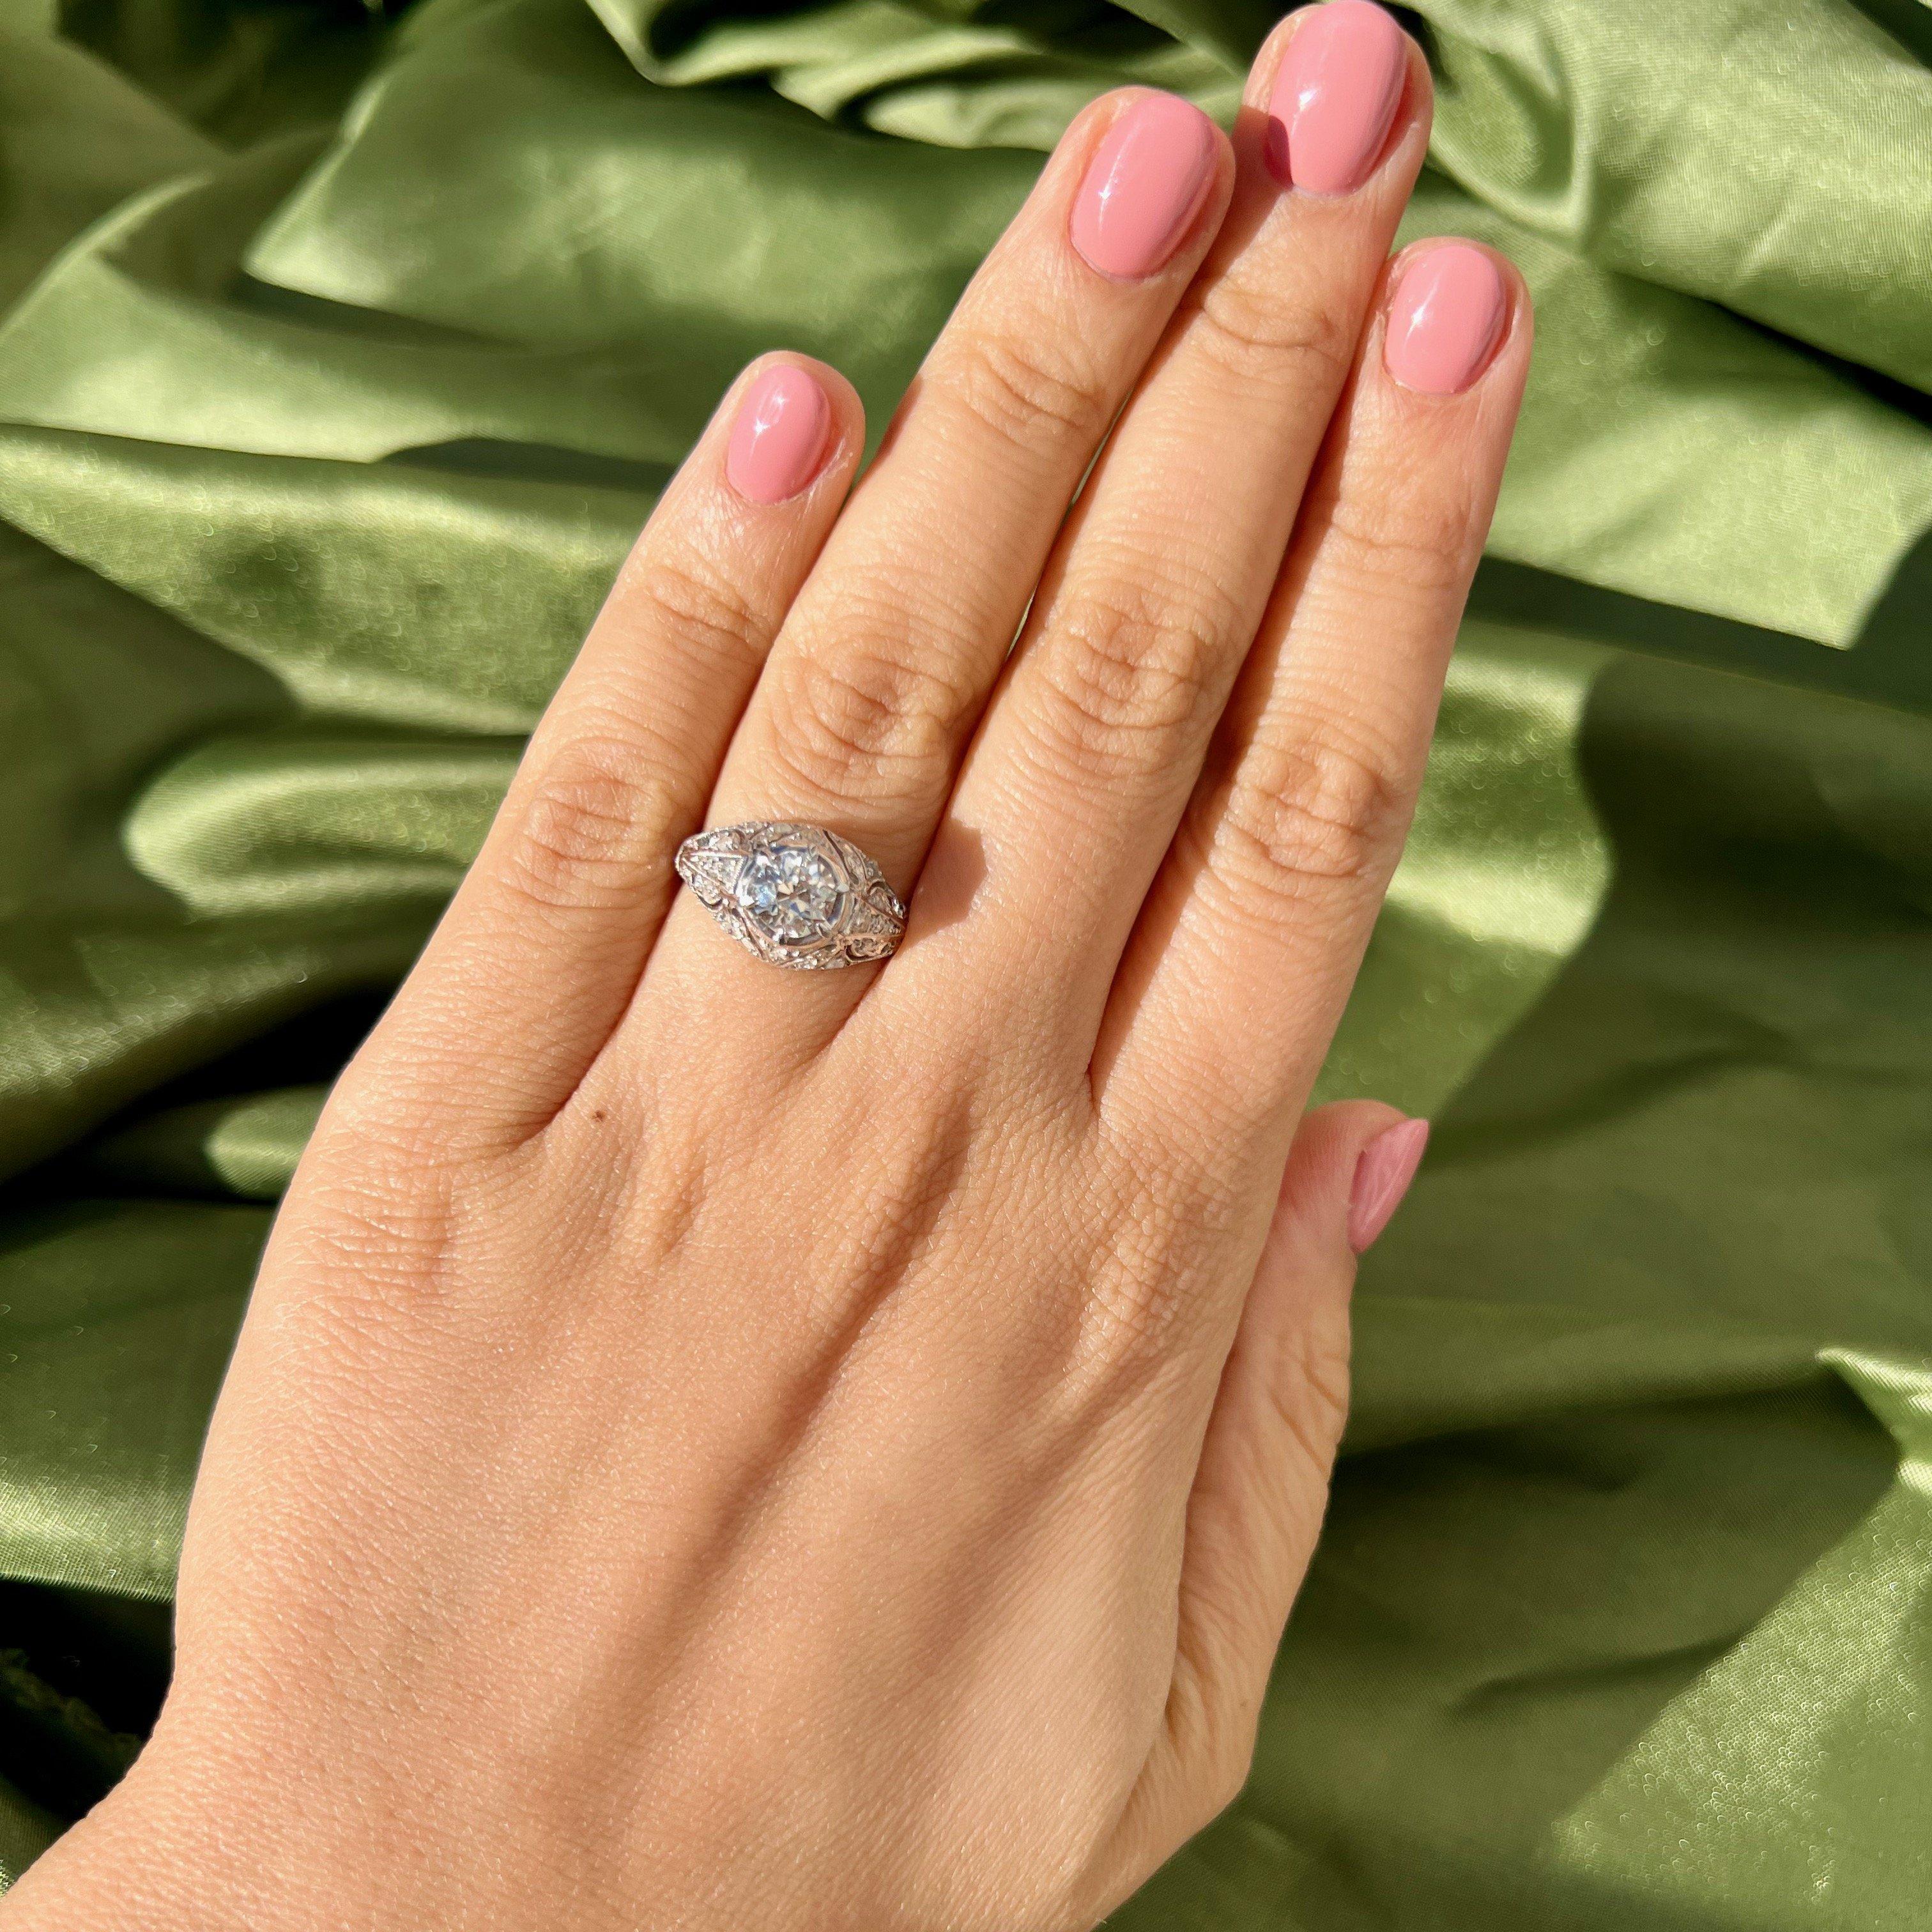 This art deco era ring checks all the boxes for us. It's centered by a beyond charming old mine cut diamond graded I SI2 by GIA. We love this cut for it's cushiony shape and blocky facets. The platinum crafted filigree setting, diamond studded, is